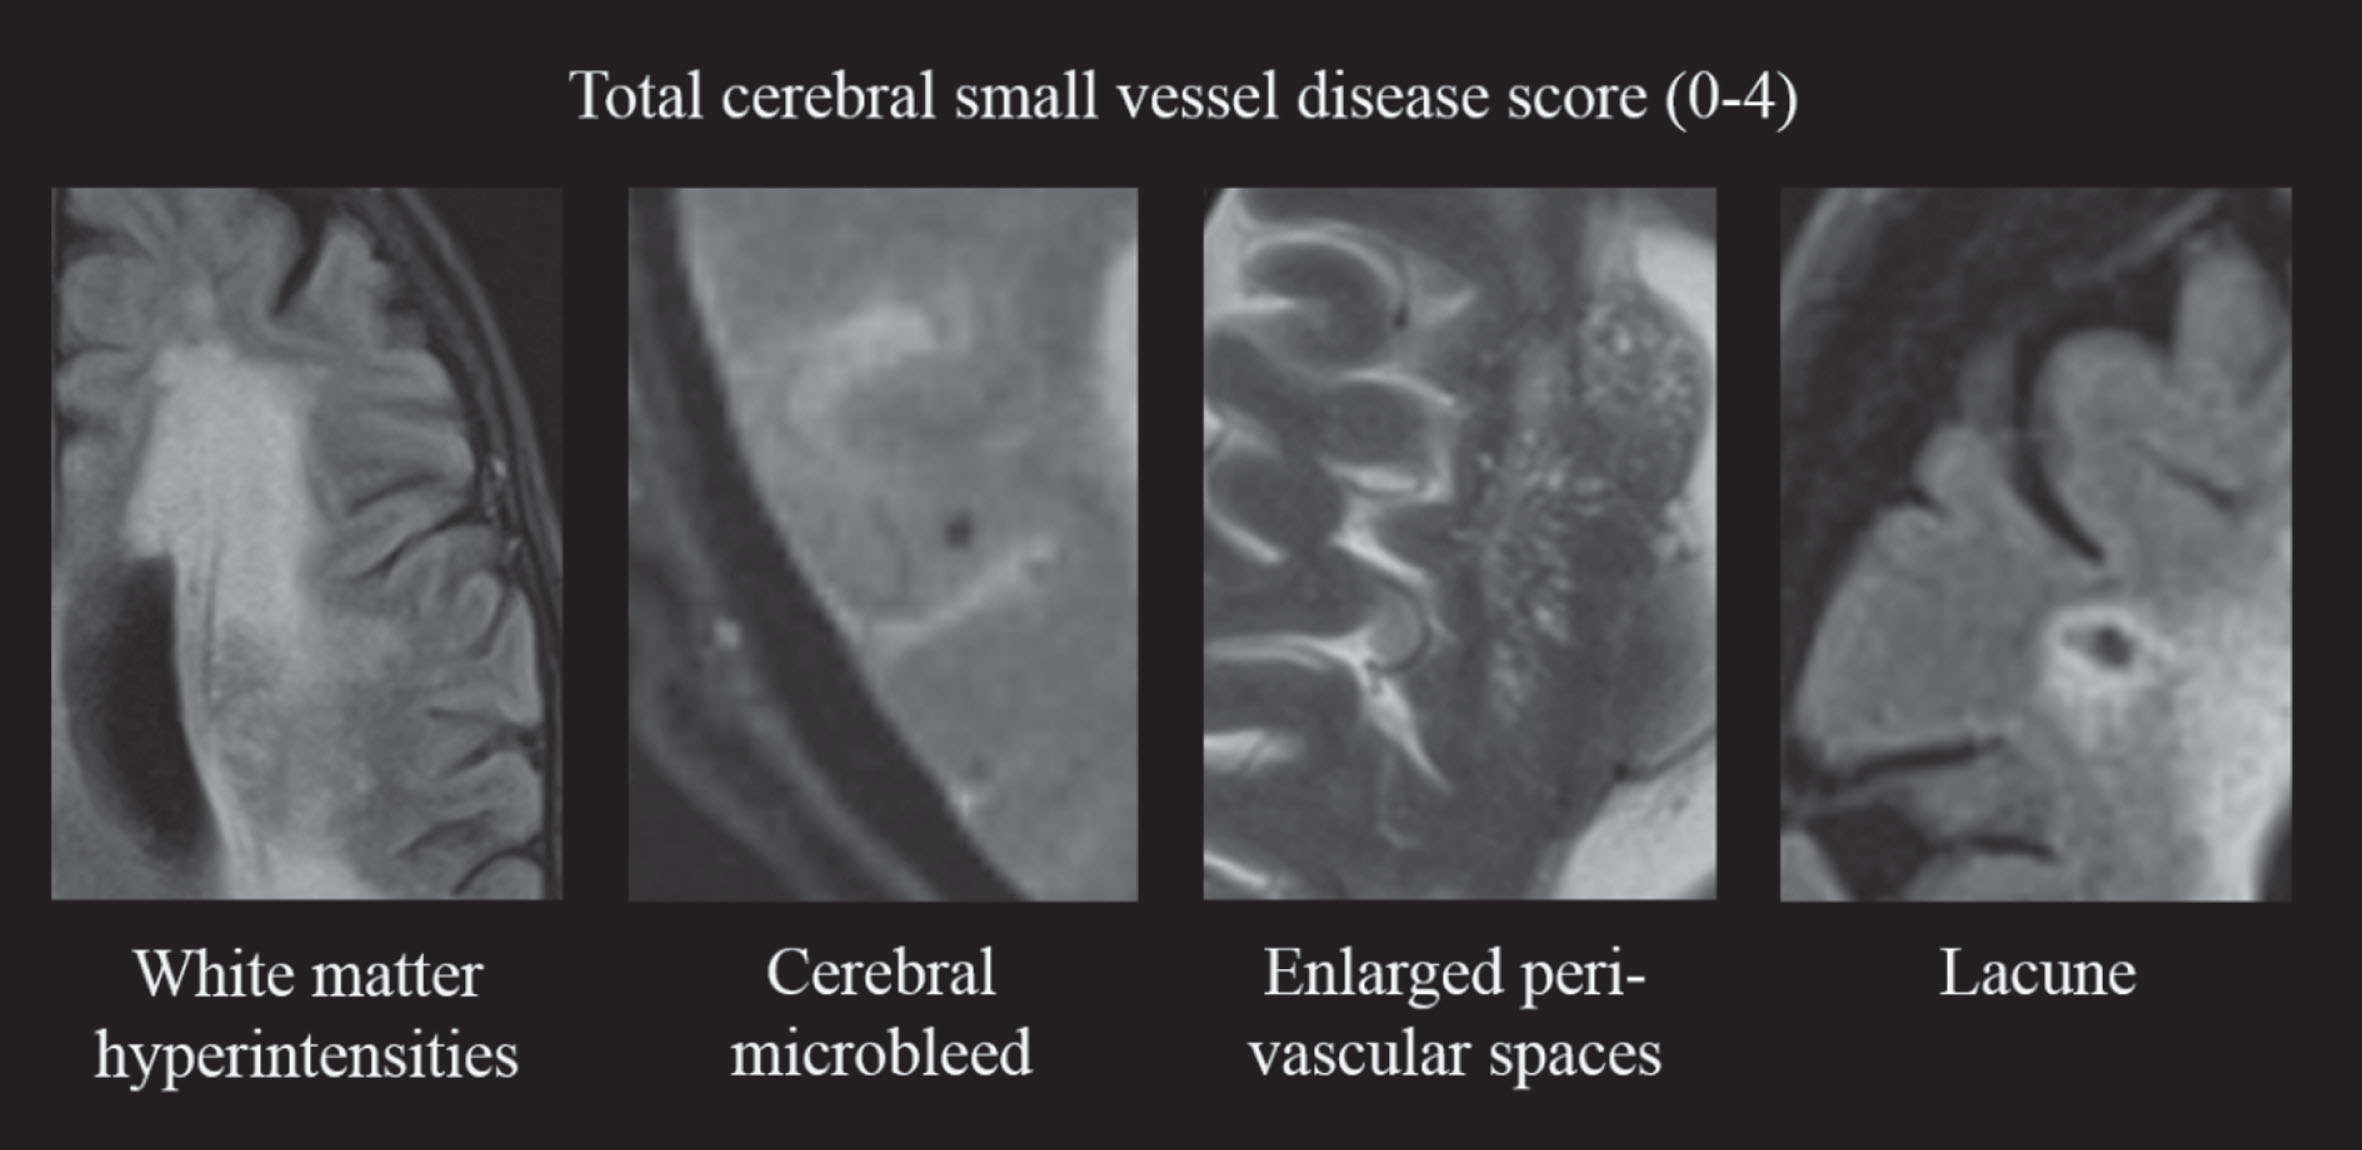 Construction of the total cerebral small vessel disease score. One point is added to the score in case of presence of: severe WMH (periventricular Fazekas grade 3 or deep Fazekas grade ≥2); ≥1 cerebral microbleed; >10 perivascular spaces visible in the basal ganglia on at least one side of the brain; ≥1 lacune. WMH, white matter hyperintensities.